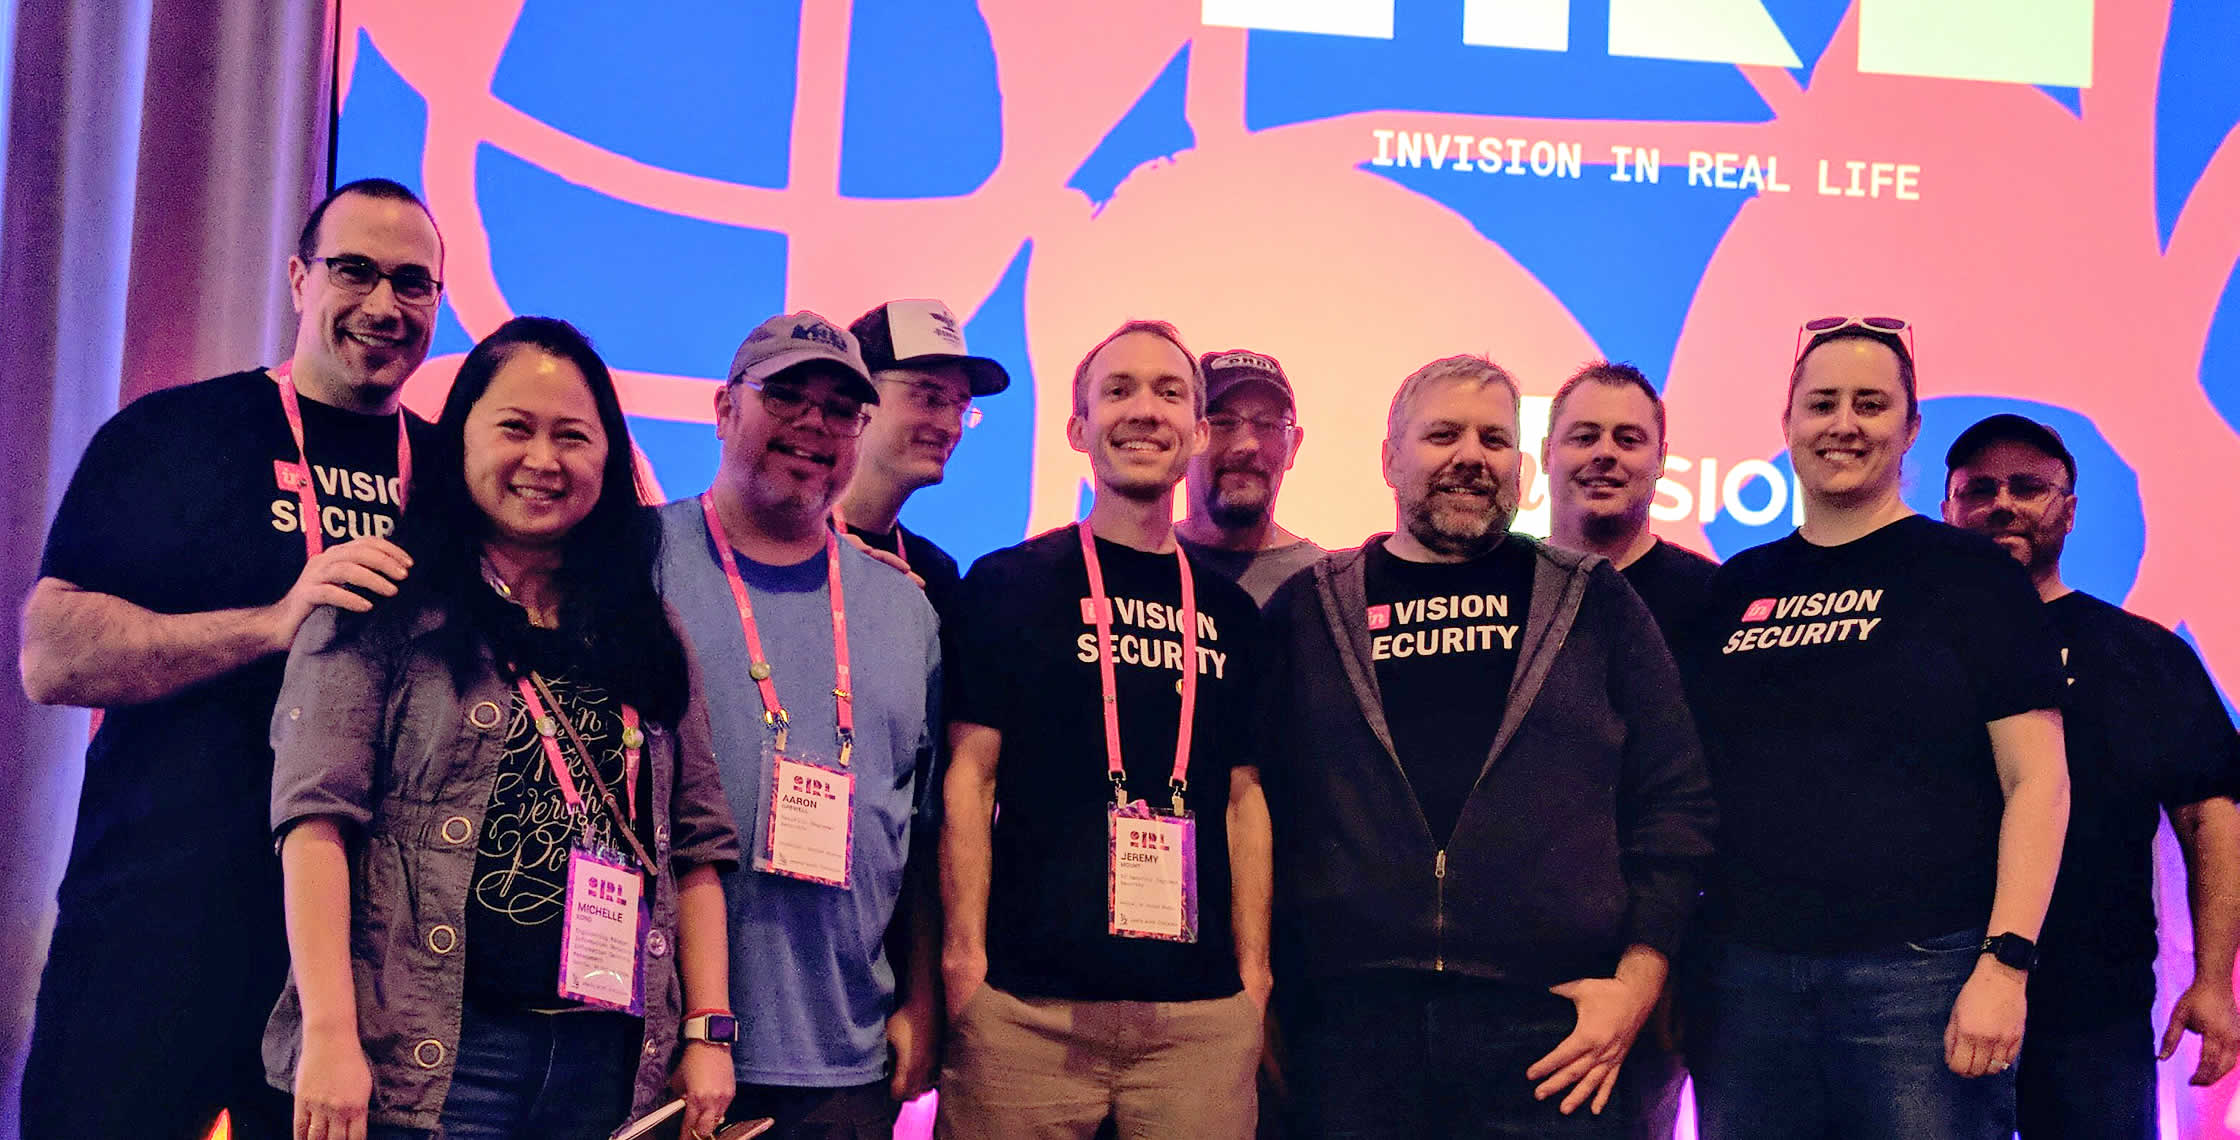 Ben Nadel at InVision In Real Life (IRL) 2018 (Hollywood, CA) with: Michelle Kong and Aaron Grewell and Shawn Grigson and Jeremy Mount and Kevin Johnson and David Epler and Johnathan Hunt and Sara Dunnack and Jeremy Kicklighter